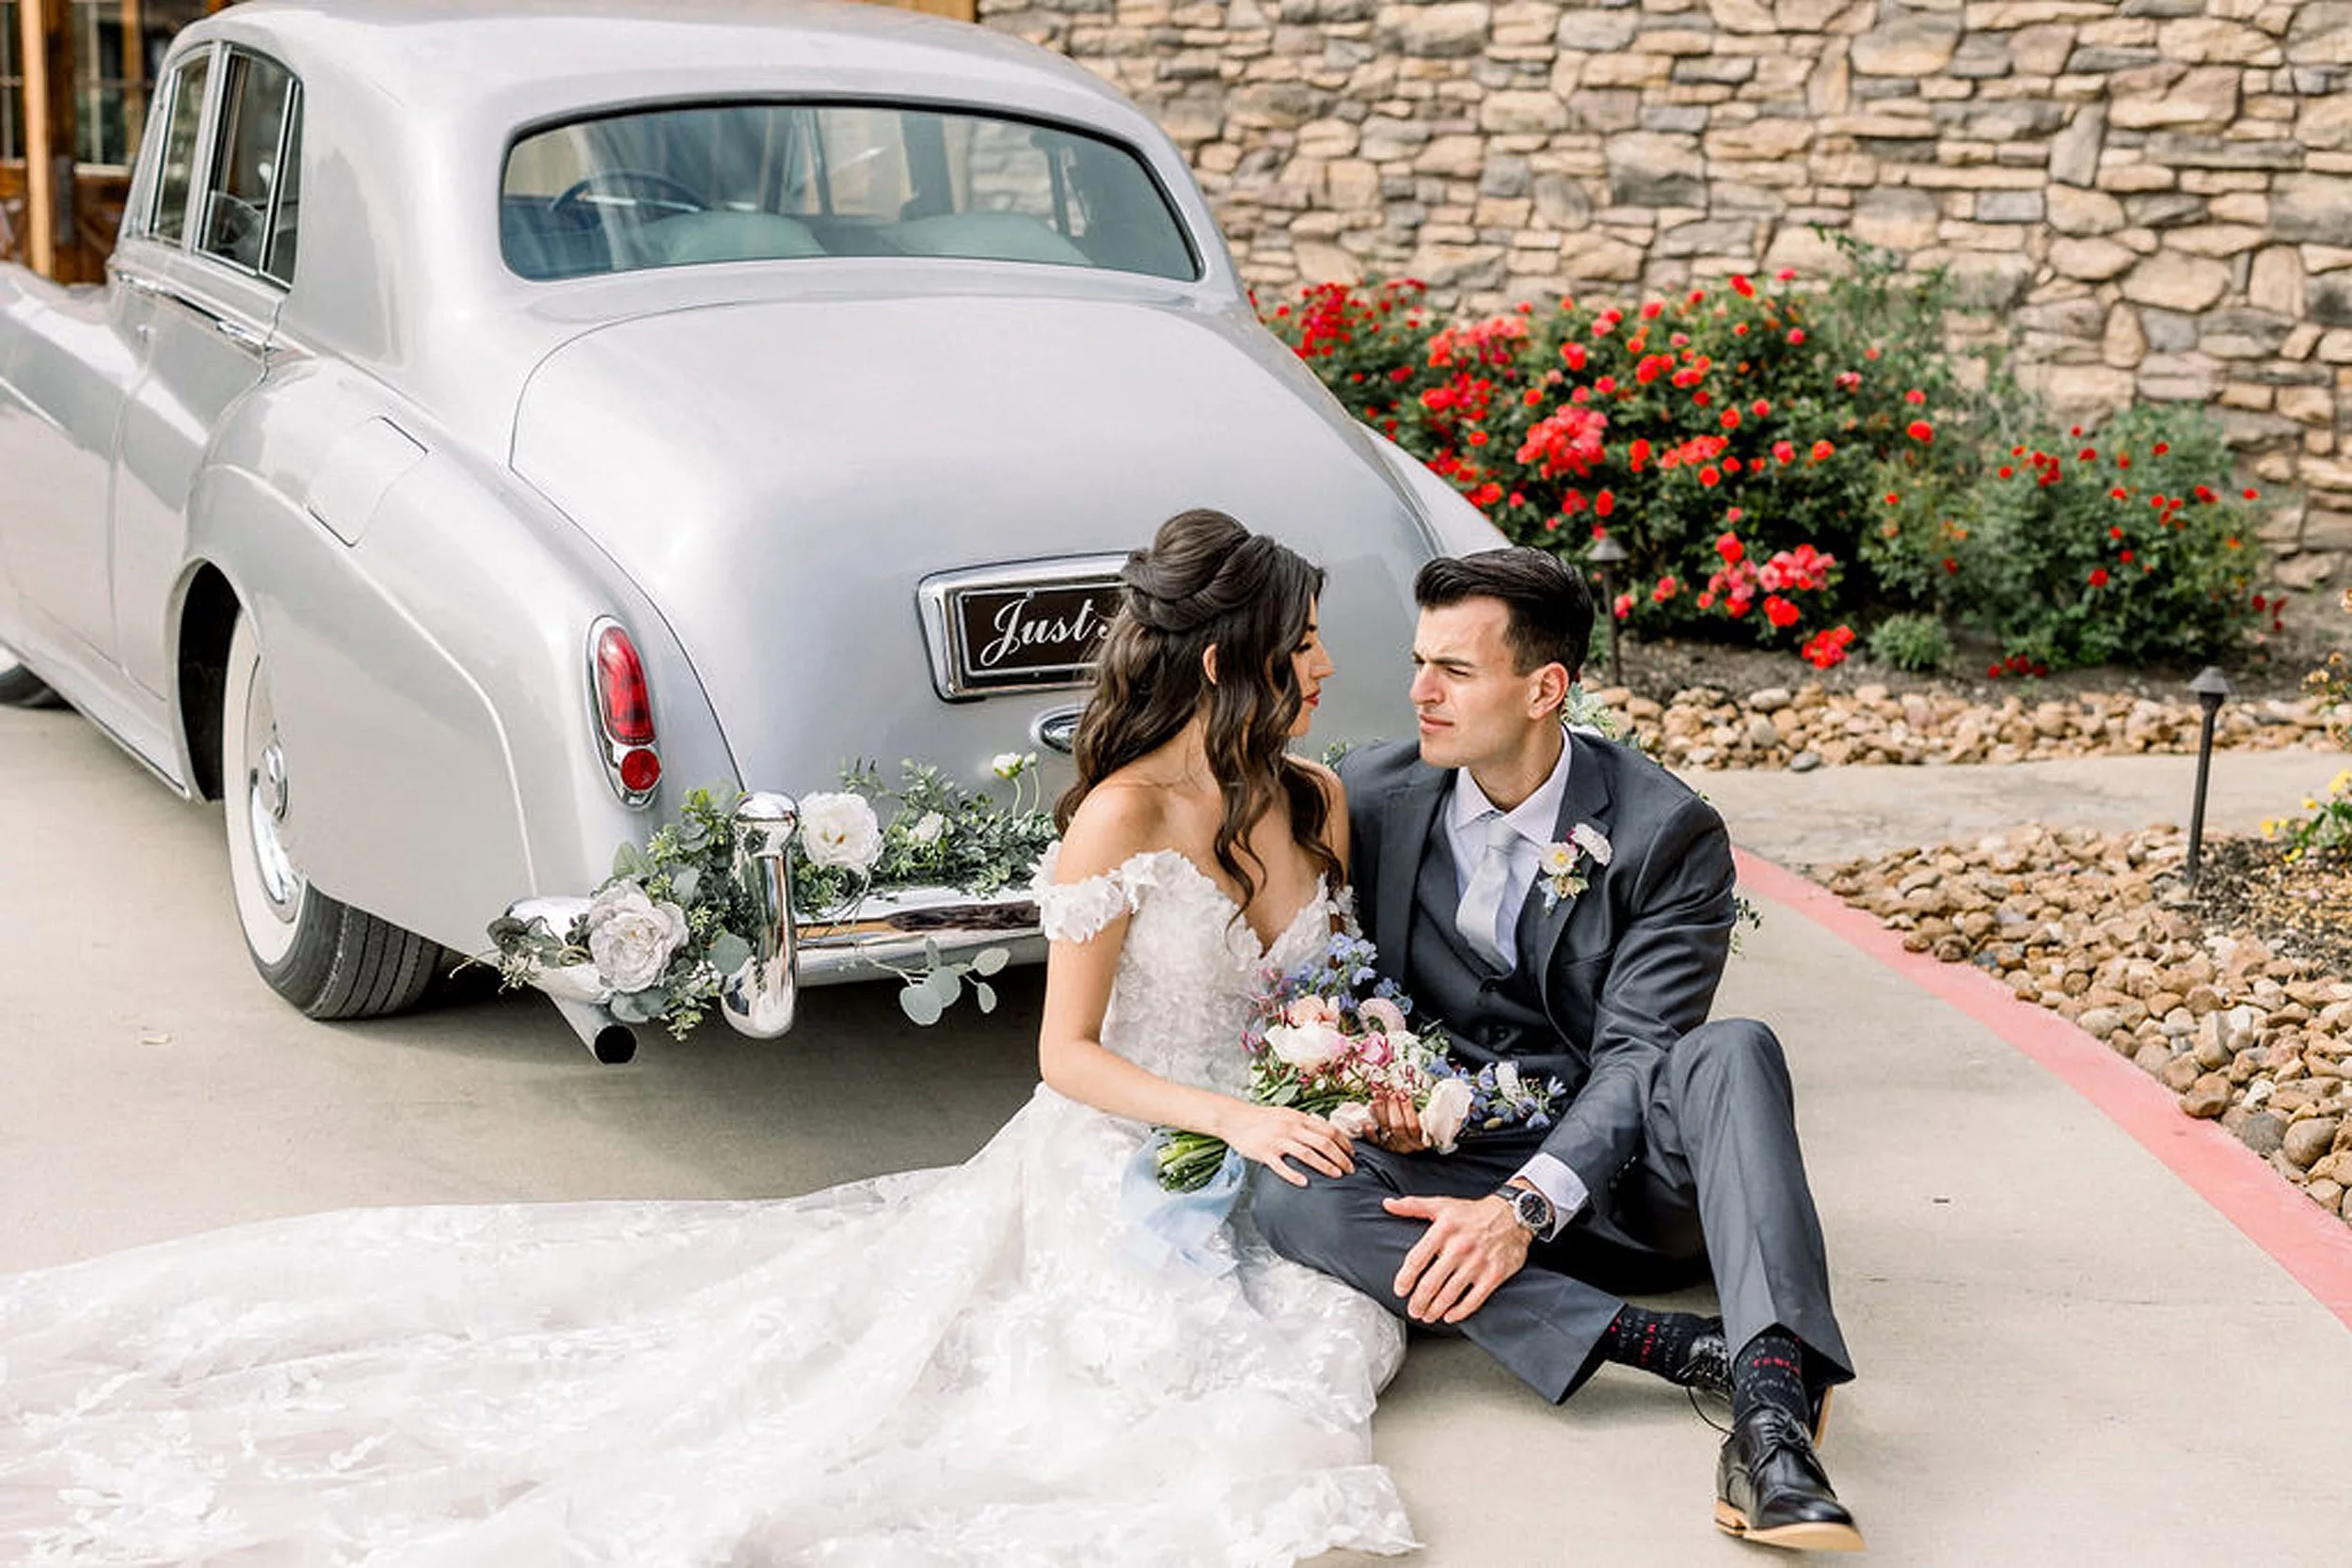 Newlyweds sit behind a silver antique car in the iron manor wedding venue driveway surrounded by red roses